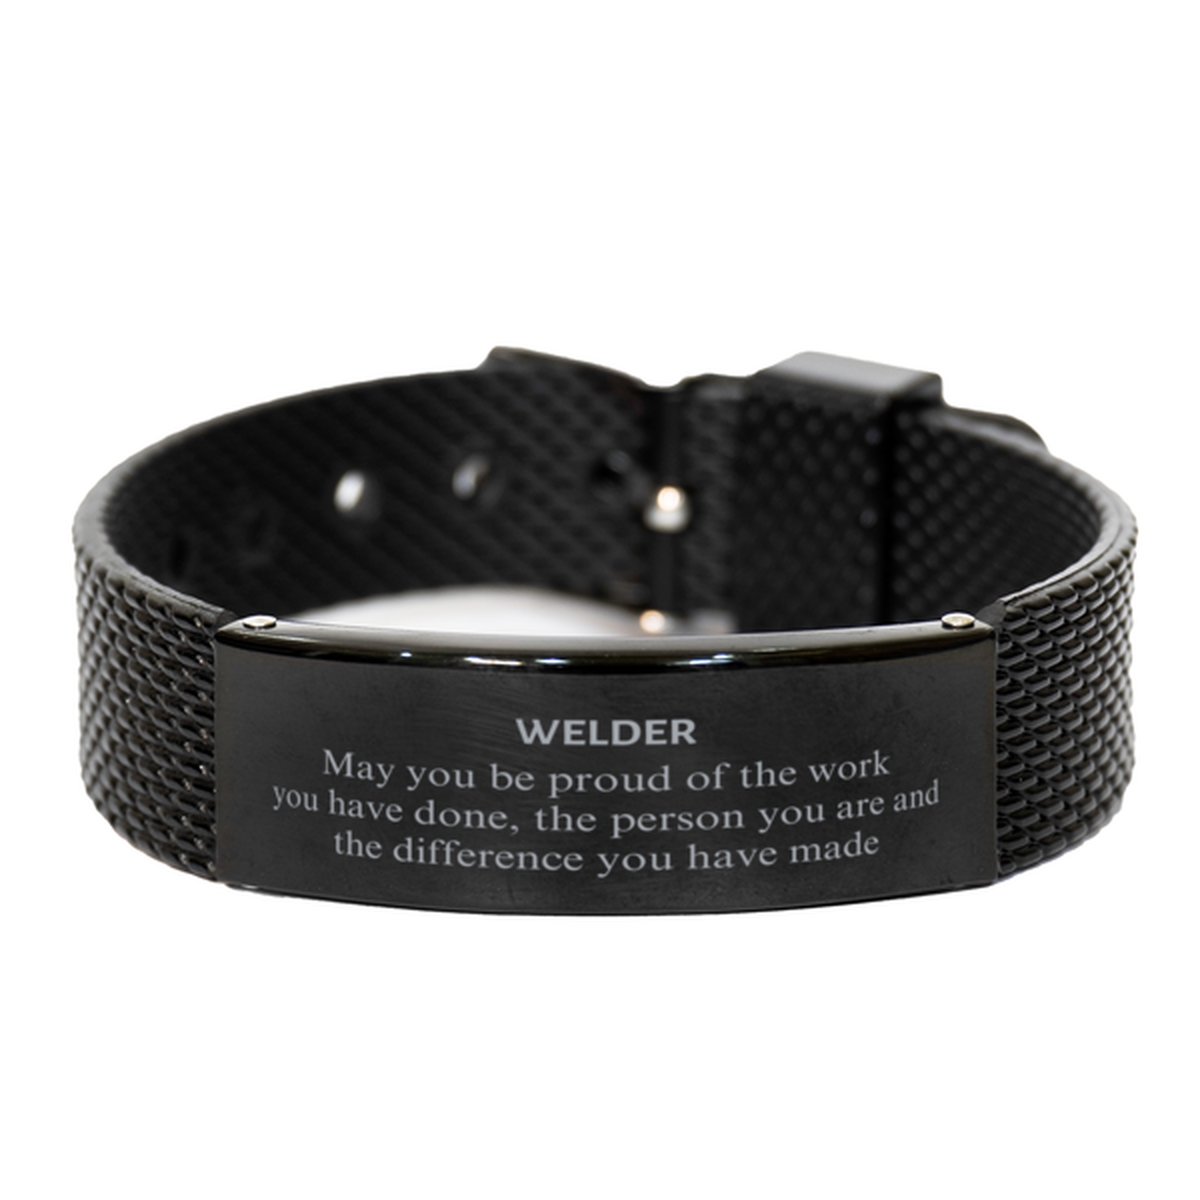 Welder May you be proud of the work you have done, Retirement Welder Black Shark Mesh Bracelet for Colleague Appreciation Gifts Amazing for Welder